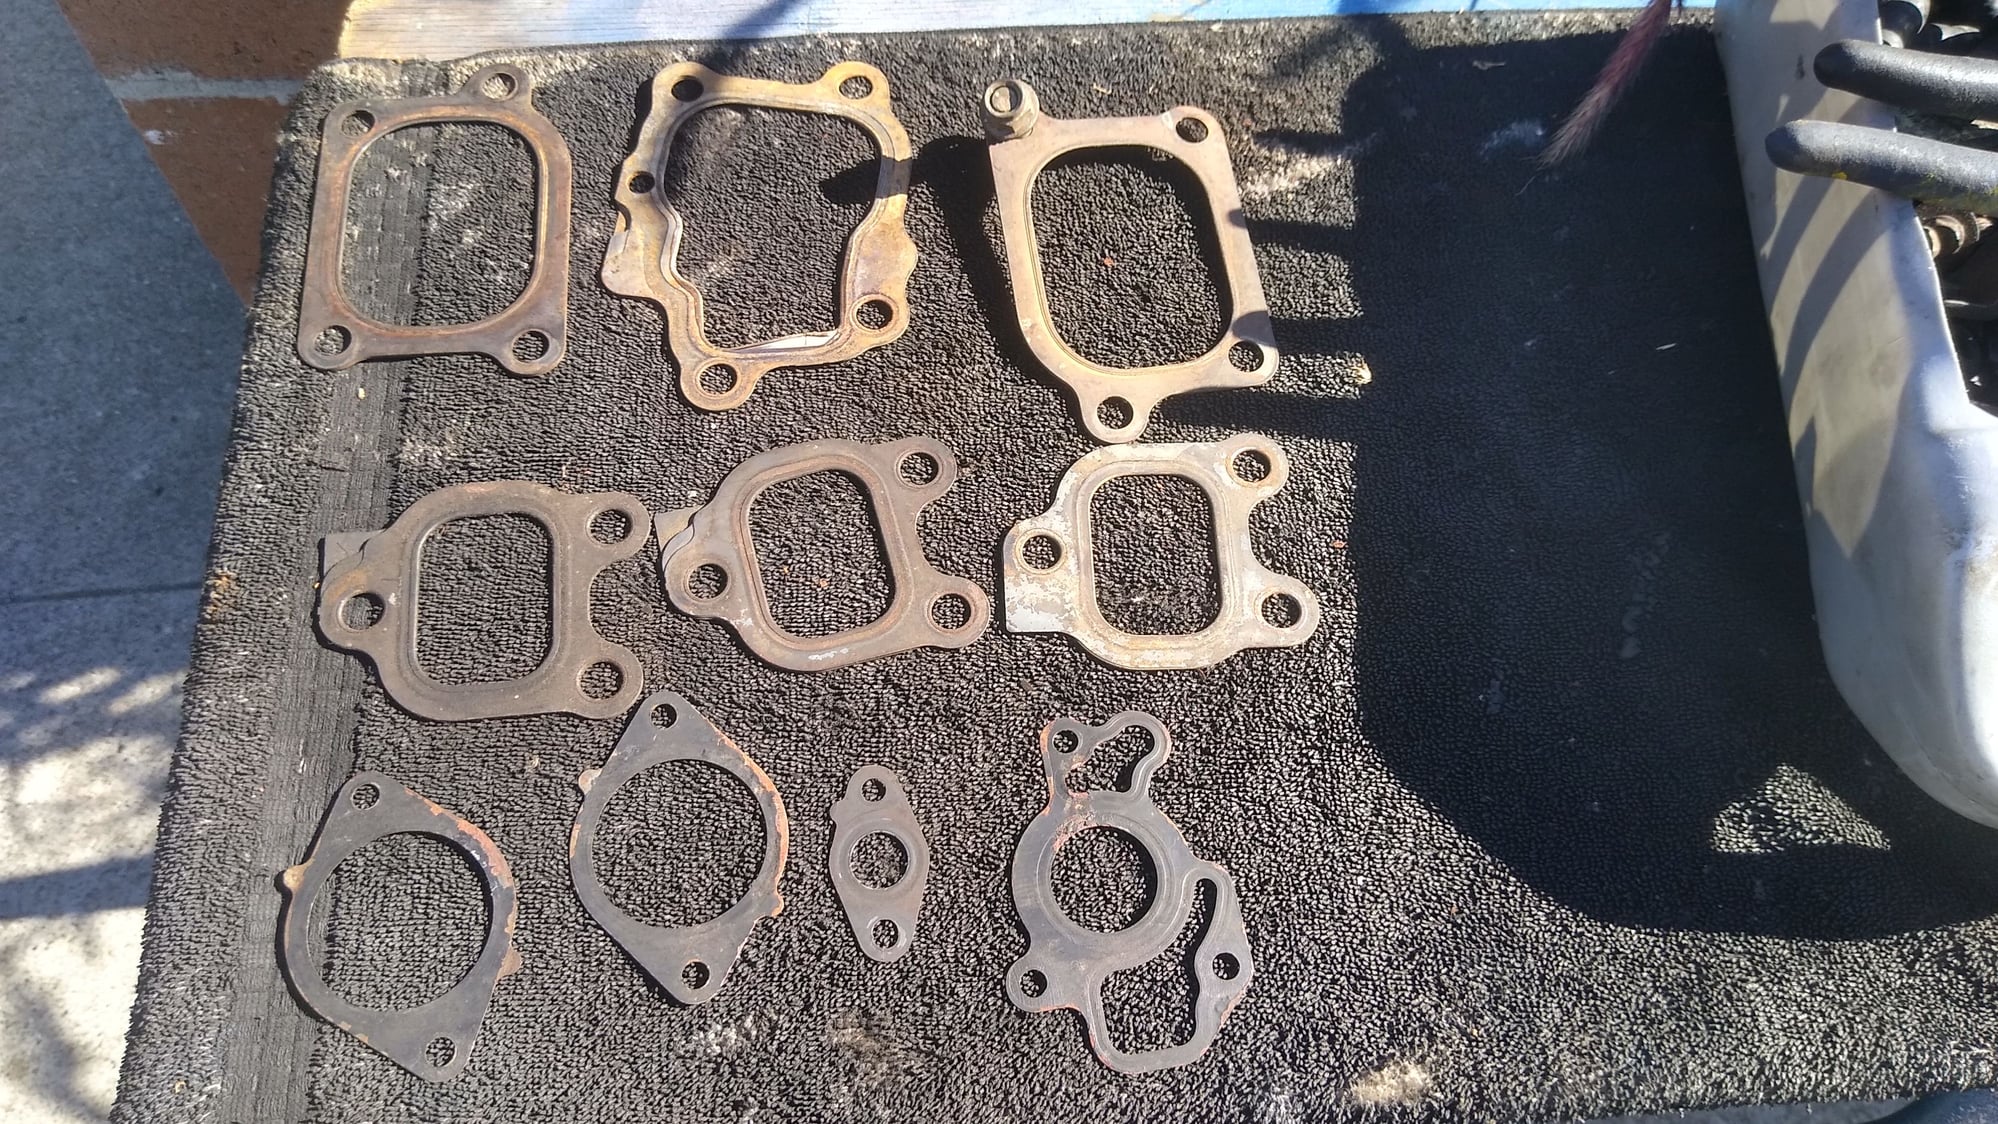 Miscellaneous - FD - OEM Various Gaskets - Used - 1993 to 1995 Mazda RX-7 - San Jose, CA 95121, United States